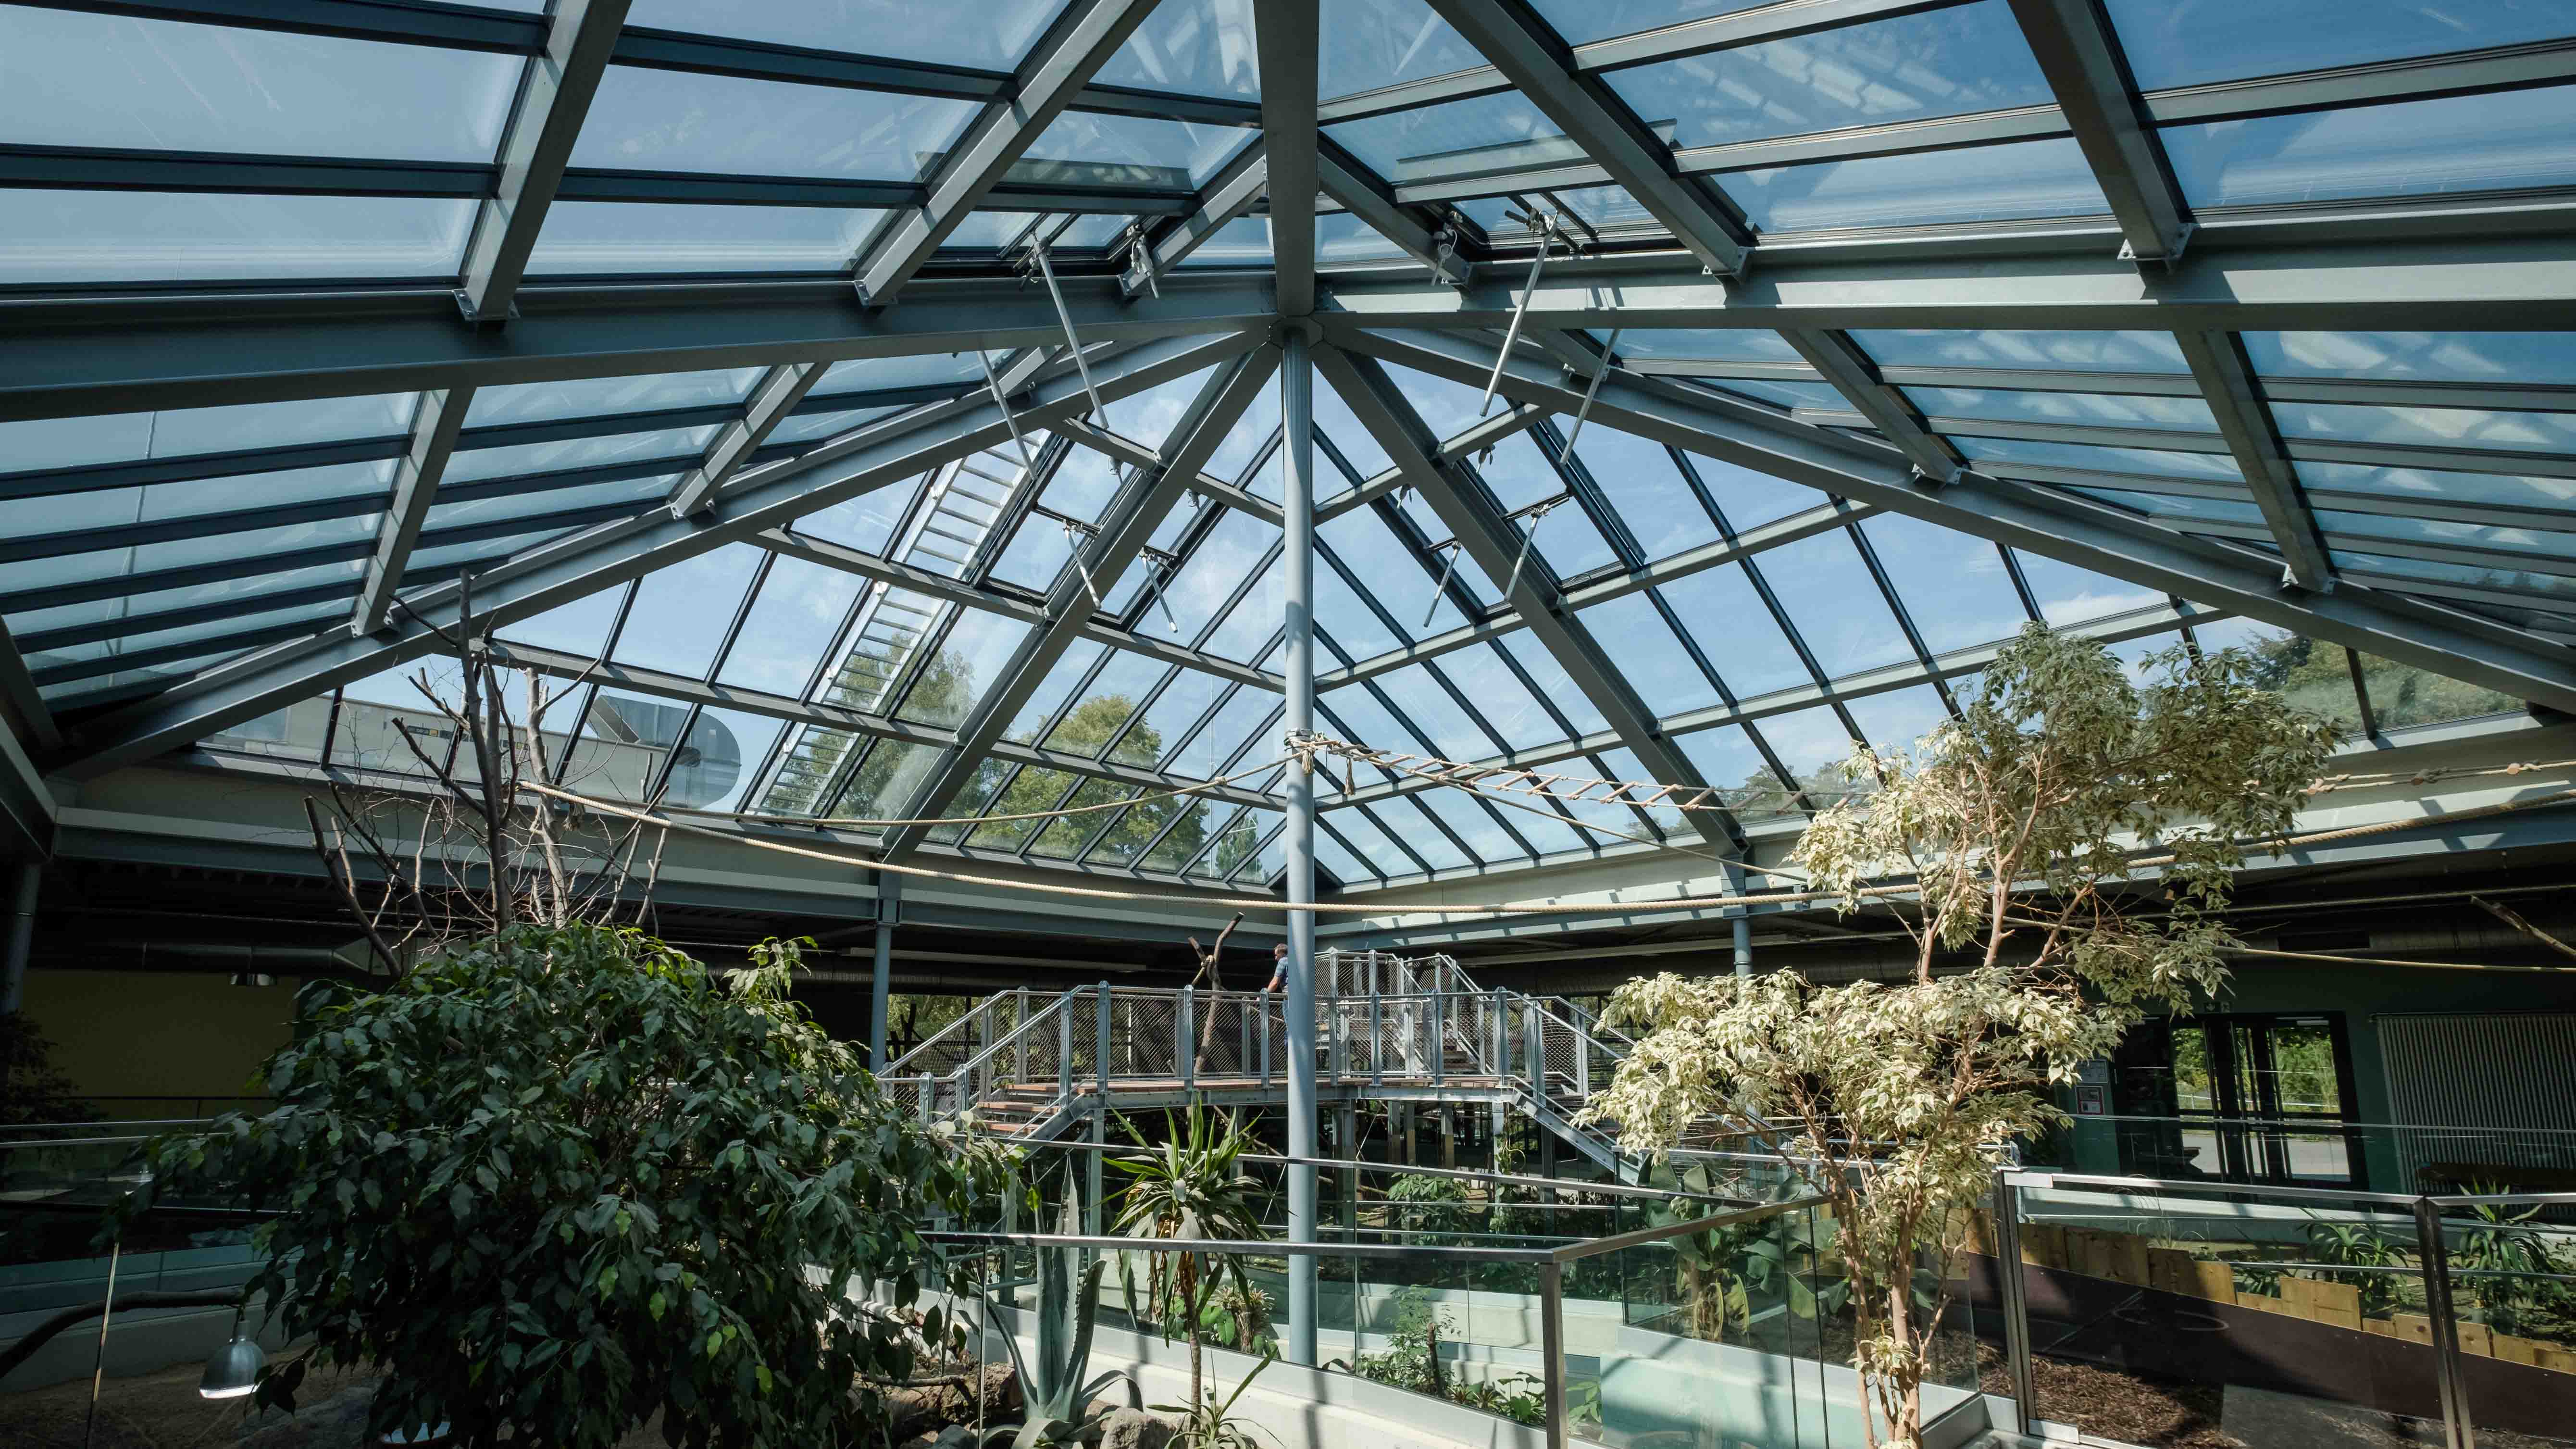 LAMILUX Glass Roof PR60 at the Zoo in Neuwied (Germany)